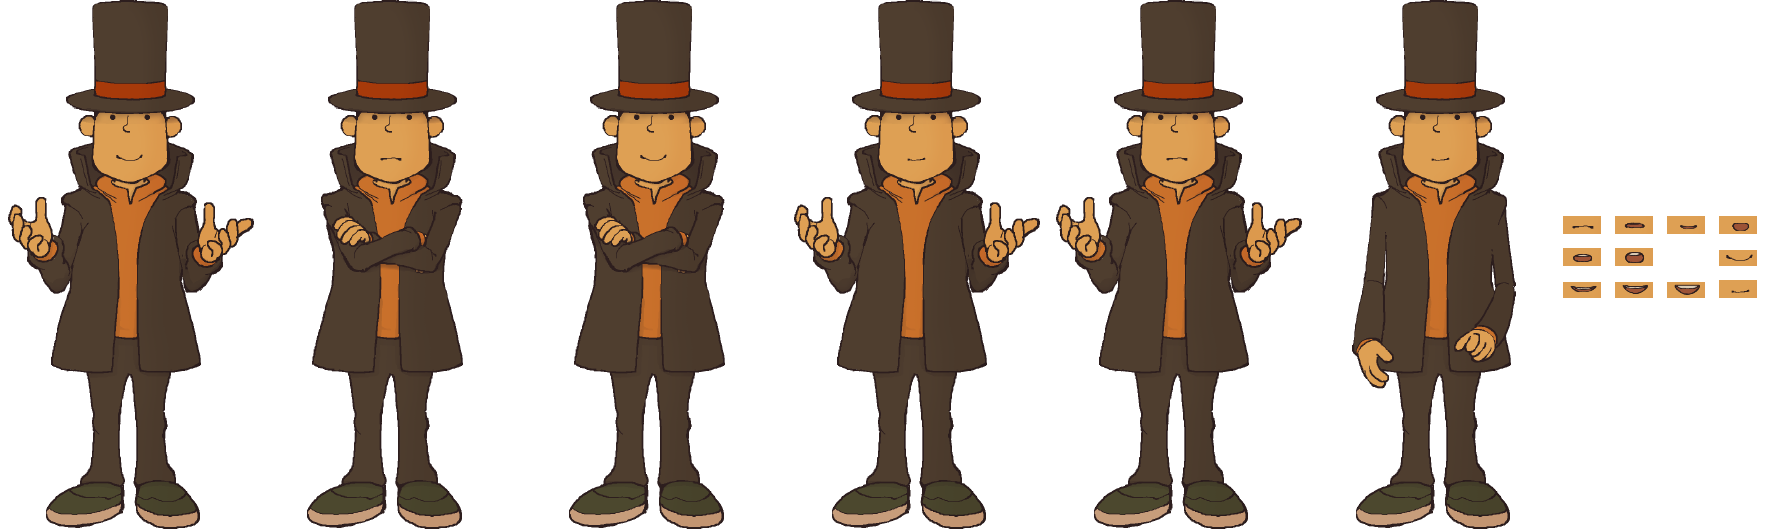 Professor Layton and the Curious Village in HD - Layton